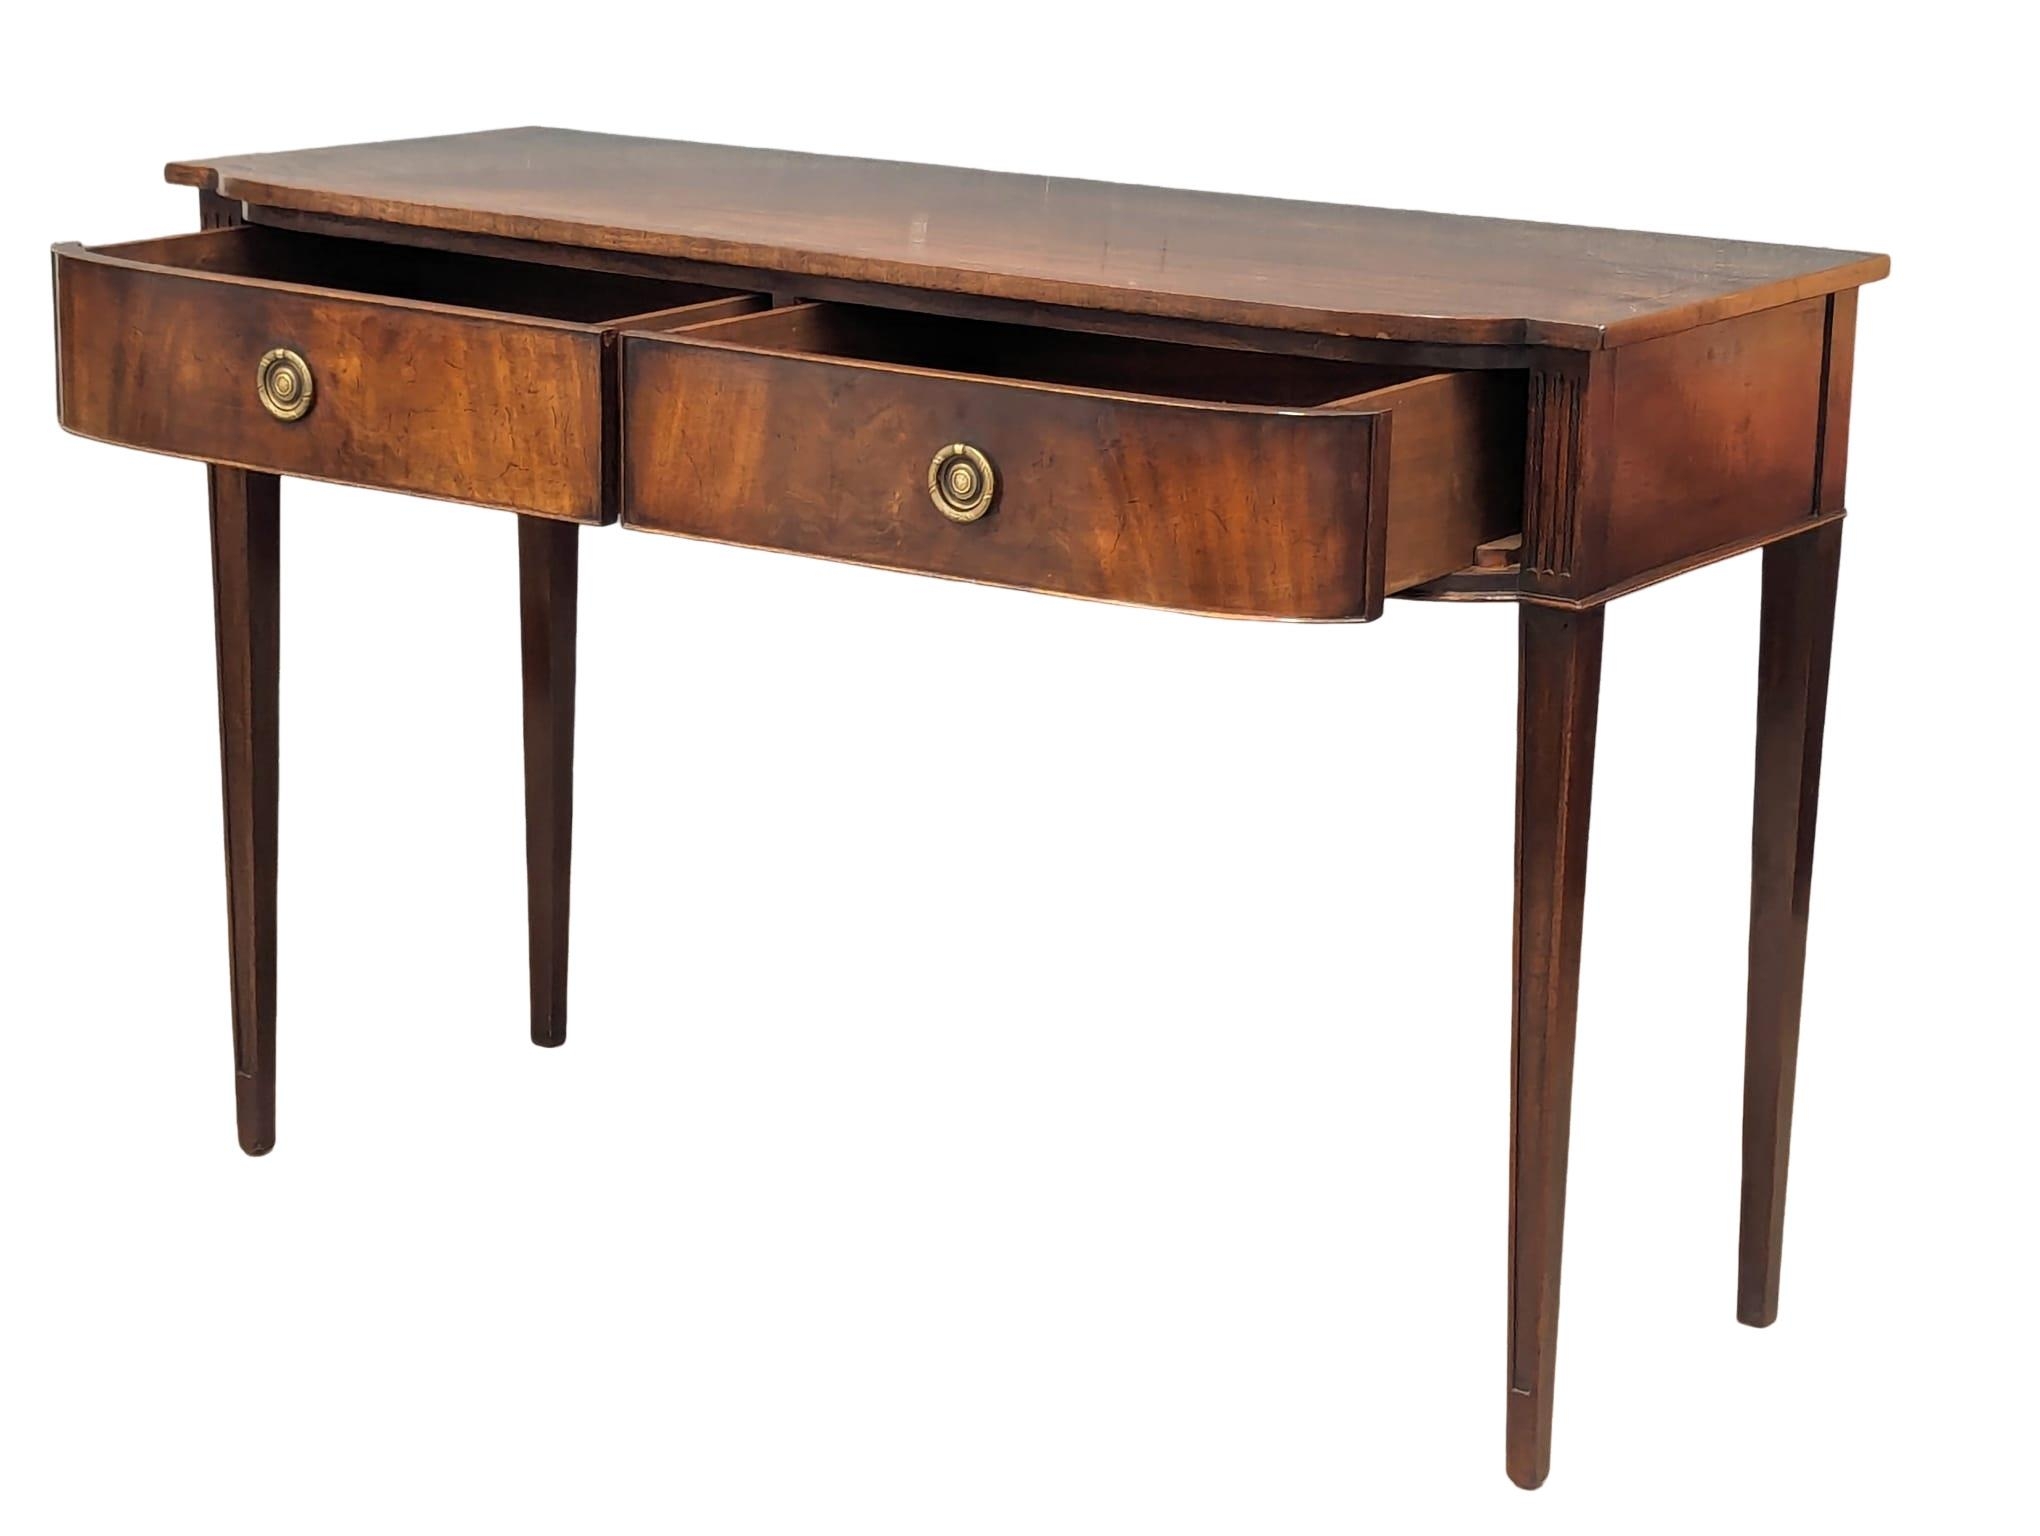 An early 20th Century inlaid mahogany console table in Hepplewhite style, 130cm x 52cm x 84cm - Image 3 of 6